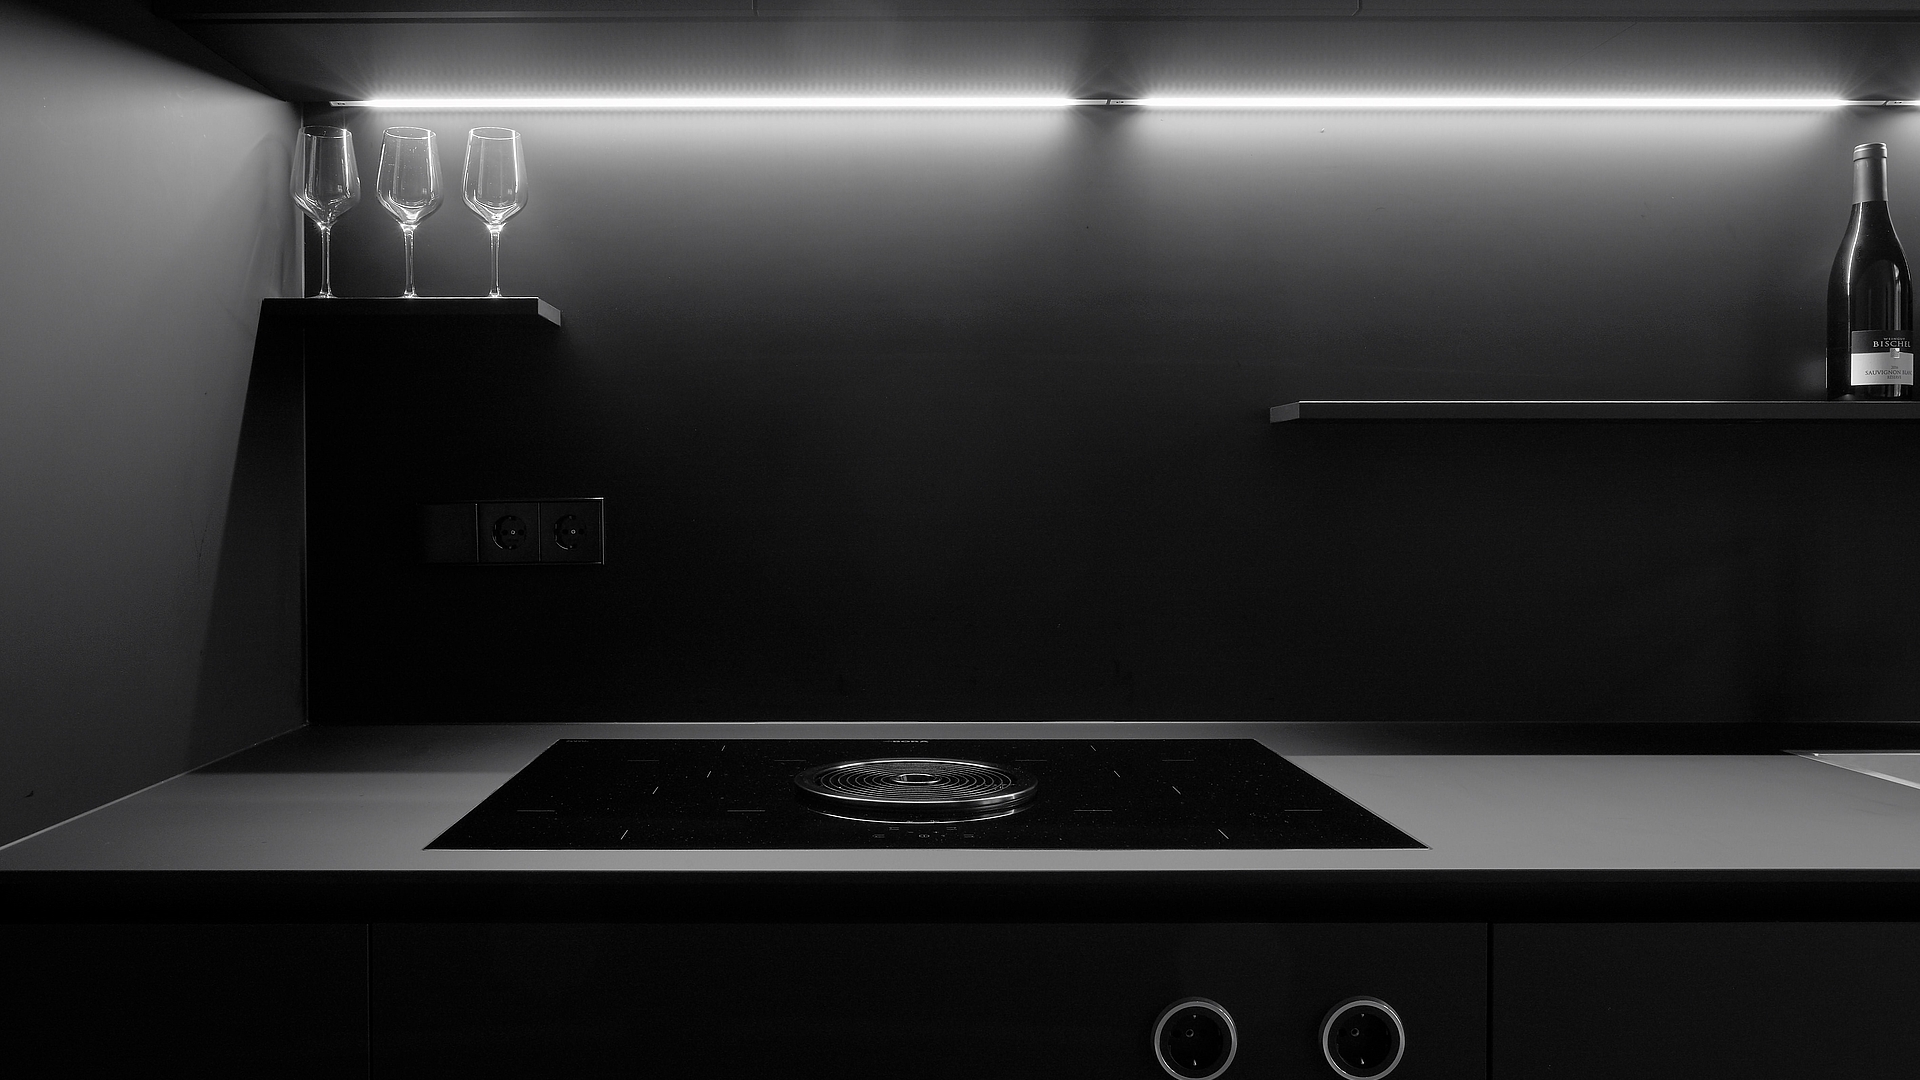 BLACK KITCHENS - ON THE TRAIL OF THE DESIGN TREND